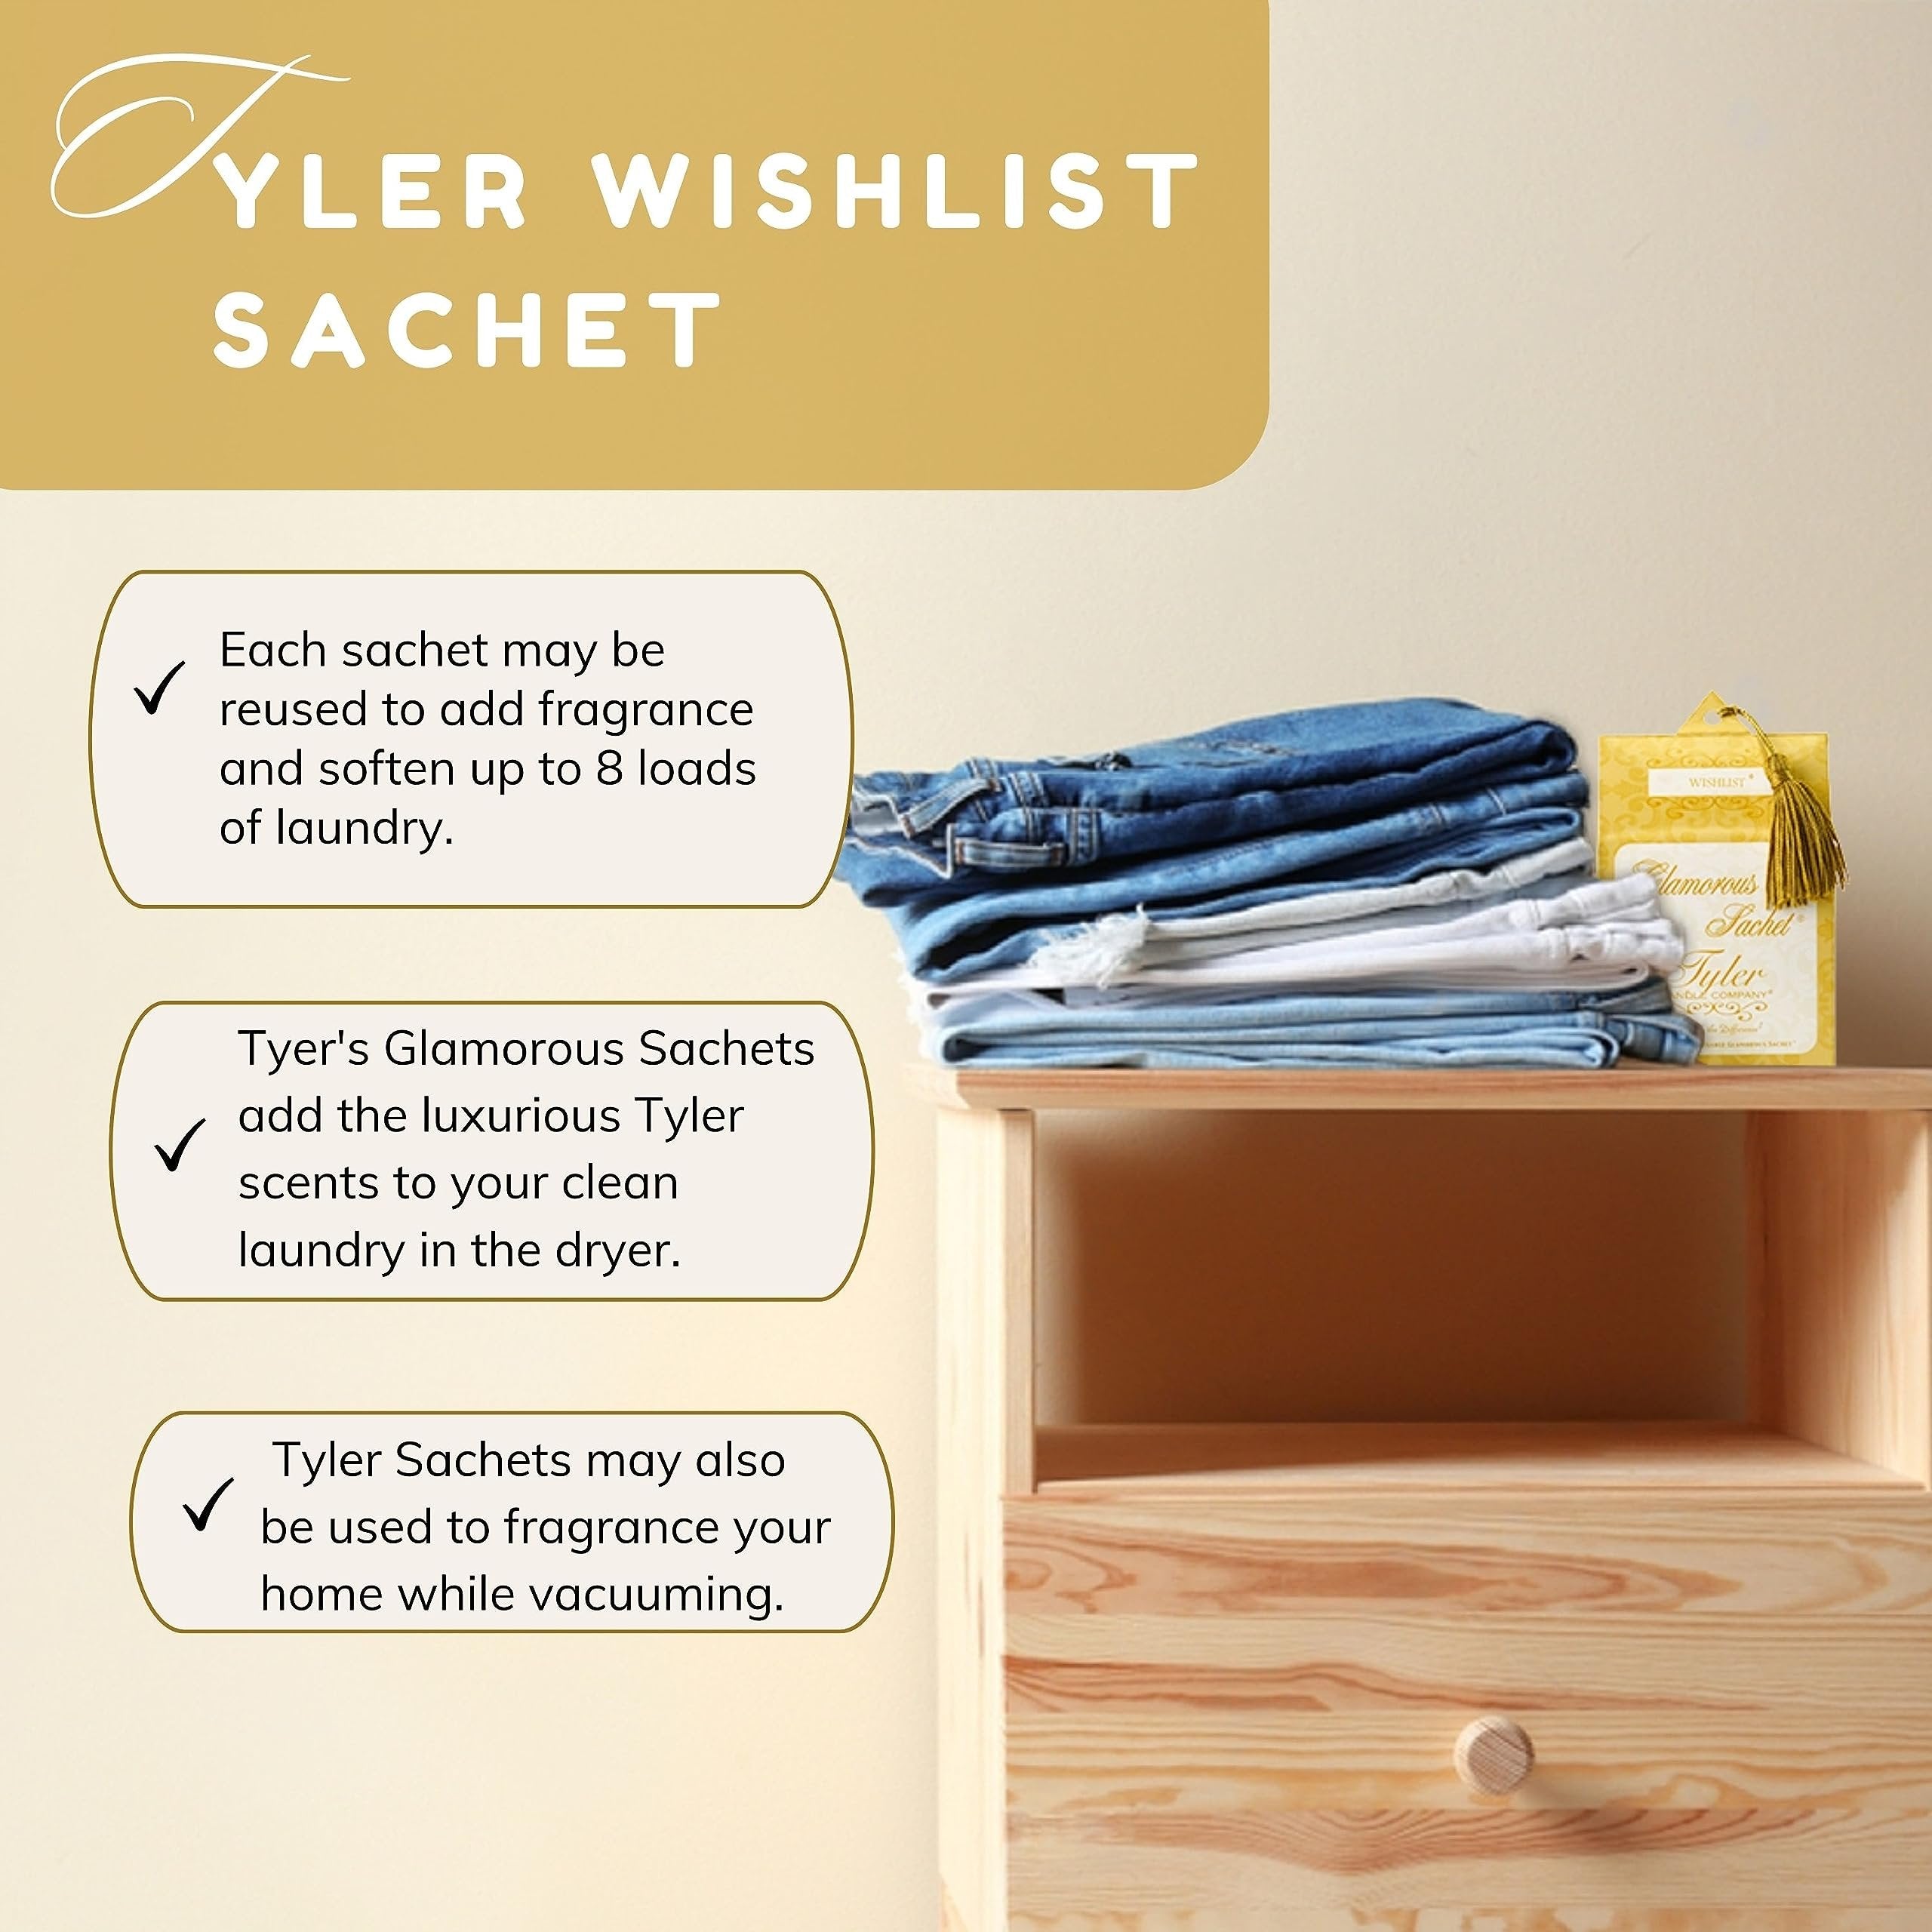 Worldwide Nutrition Bundle, 2 Items: Tyler Wishlist Dryer Sheet Sachets - Glamorous Reusable Dryer Sheets - Sachets for Drawers and Closet Refresher - 1 Pack, 4 Sachets and Multi-Purpose Key Chain